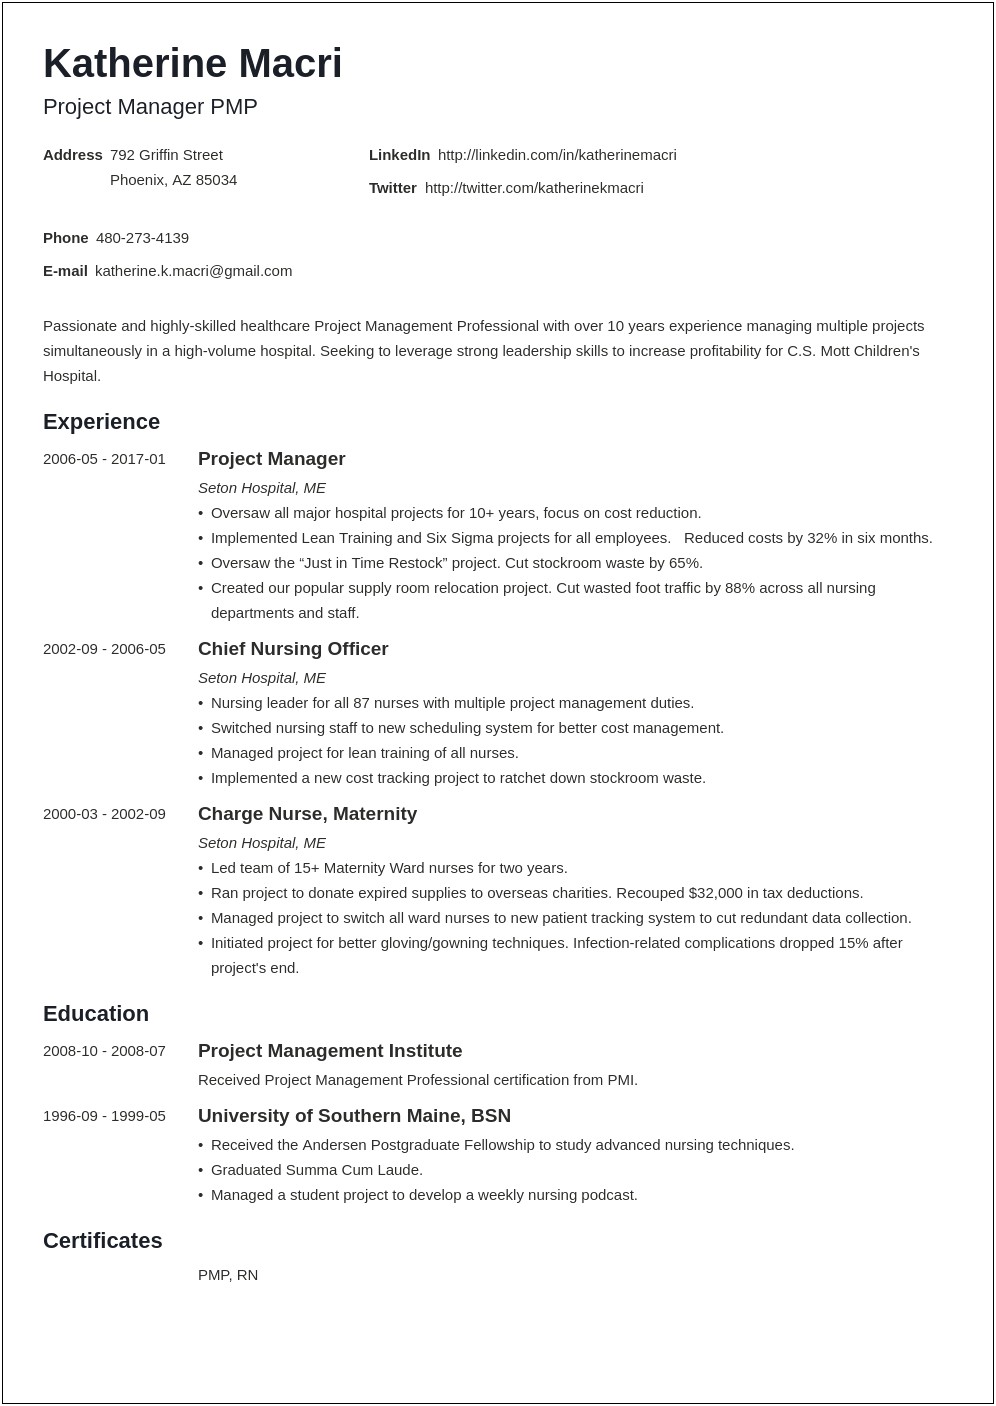 Sample Resume Development Project Manager